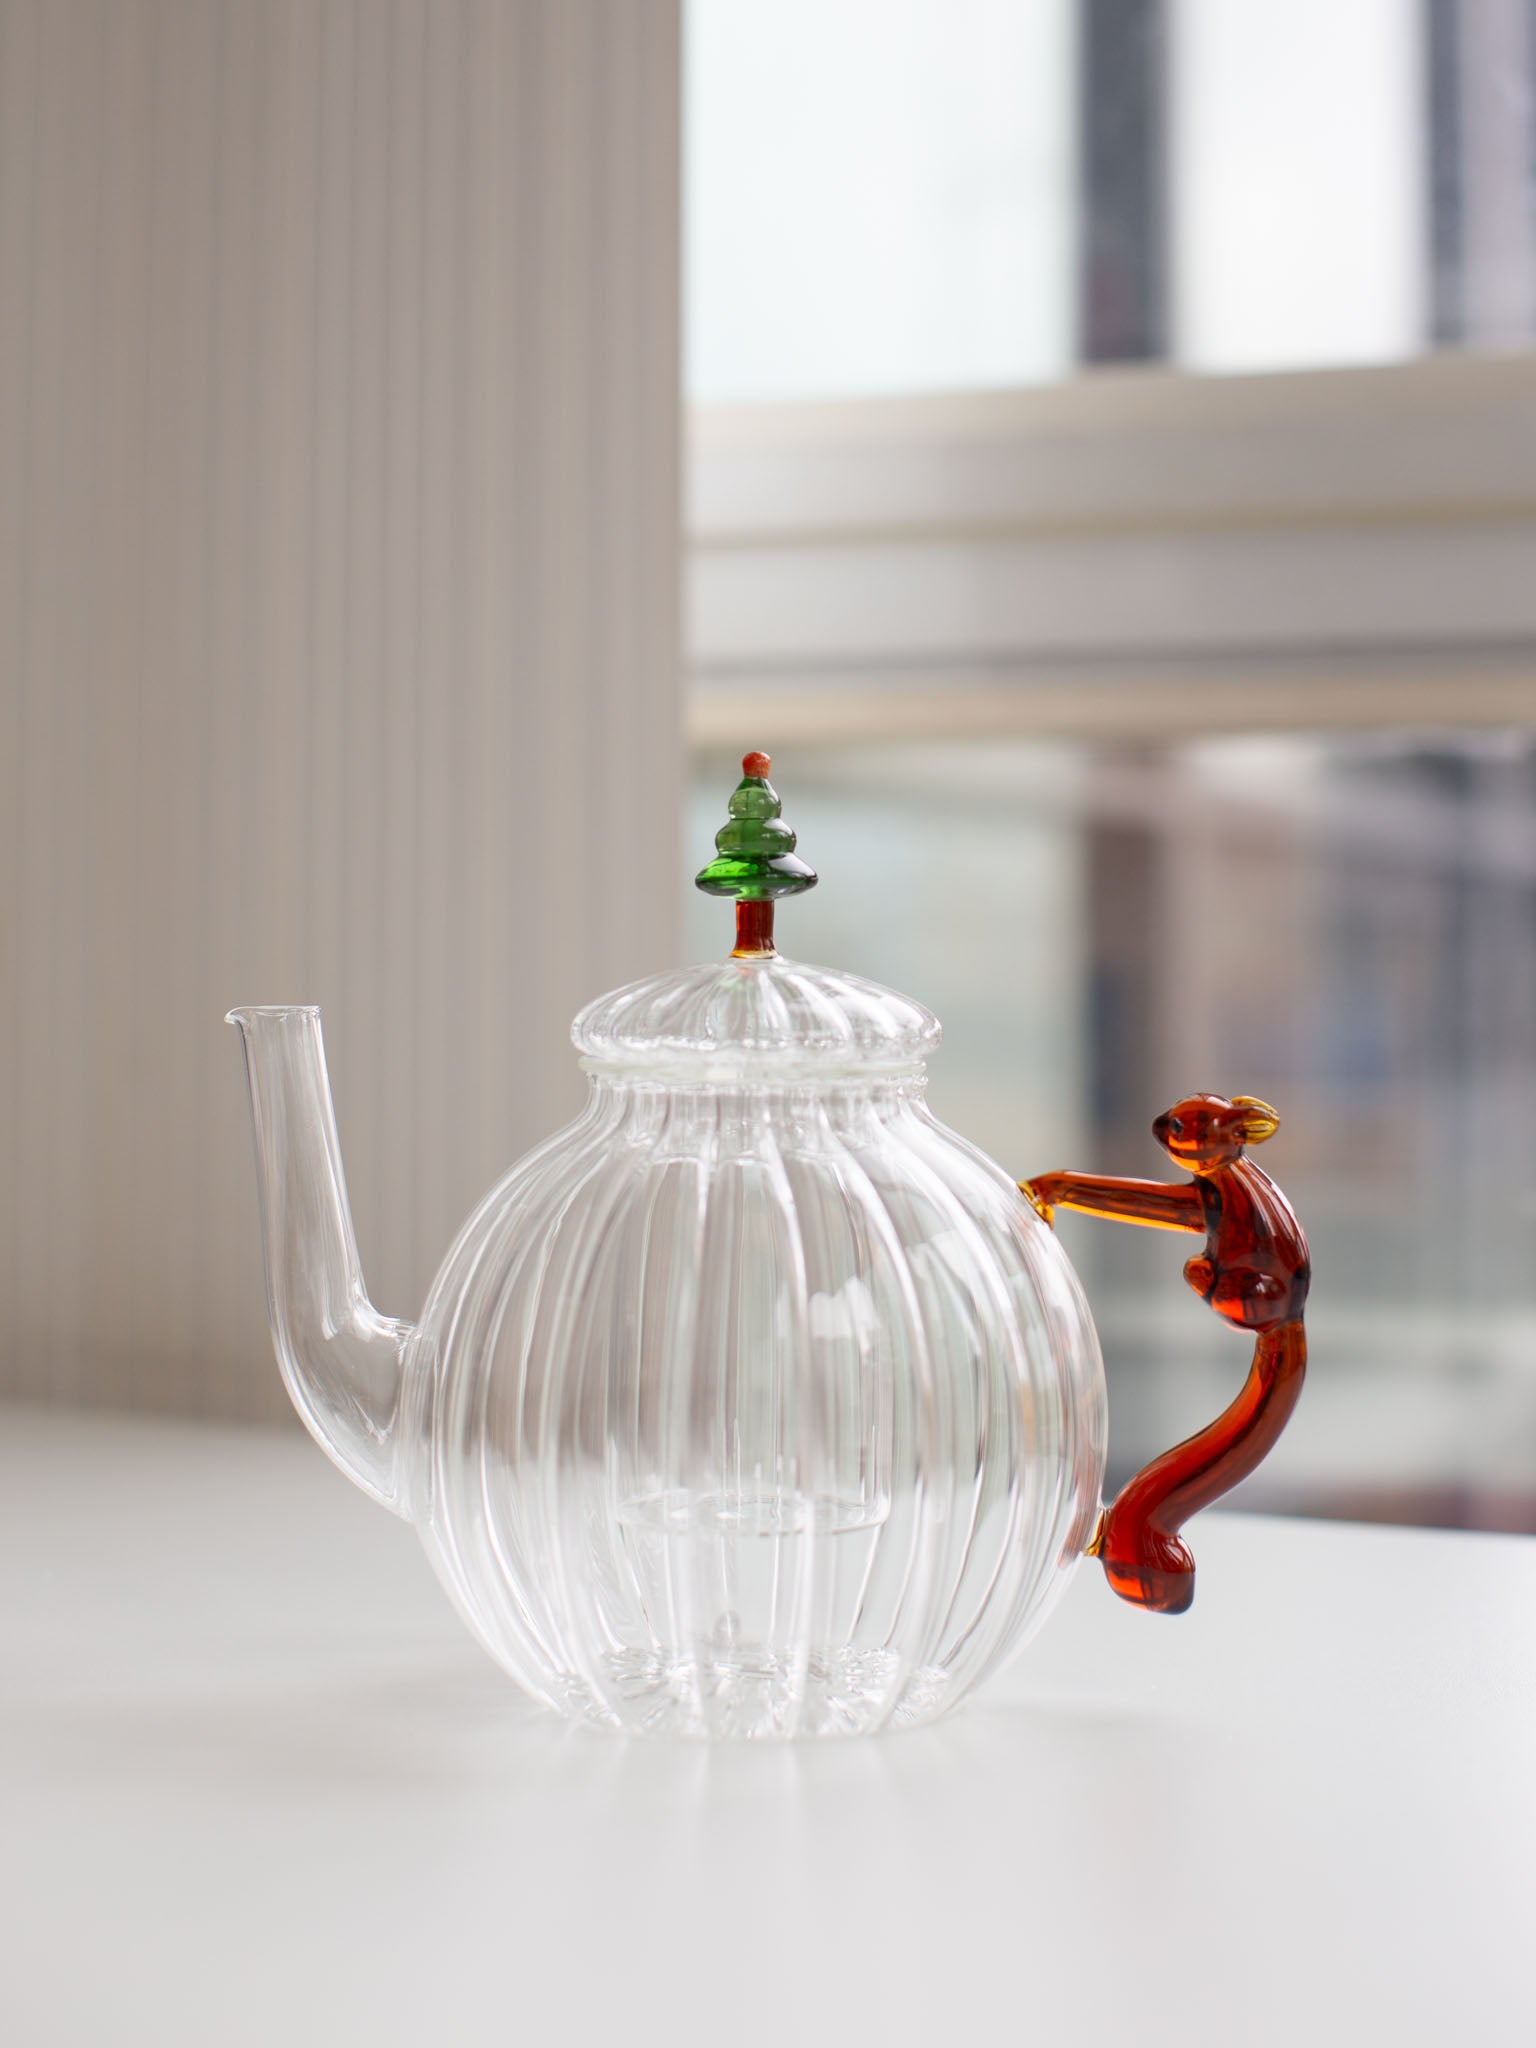 ICHENDORF Milano WOODLAND TALES Teapot - Squirrel & Wish Tree – Out & About